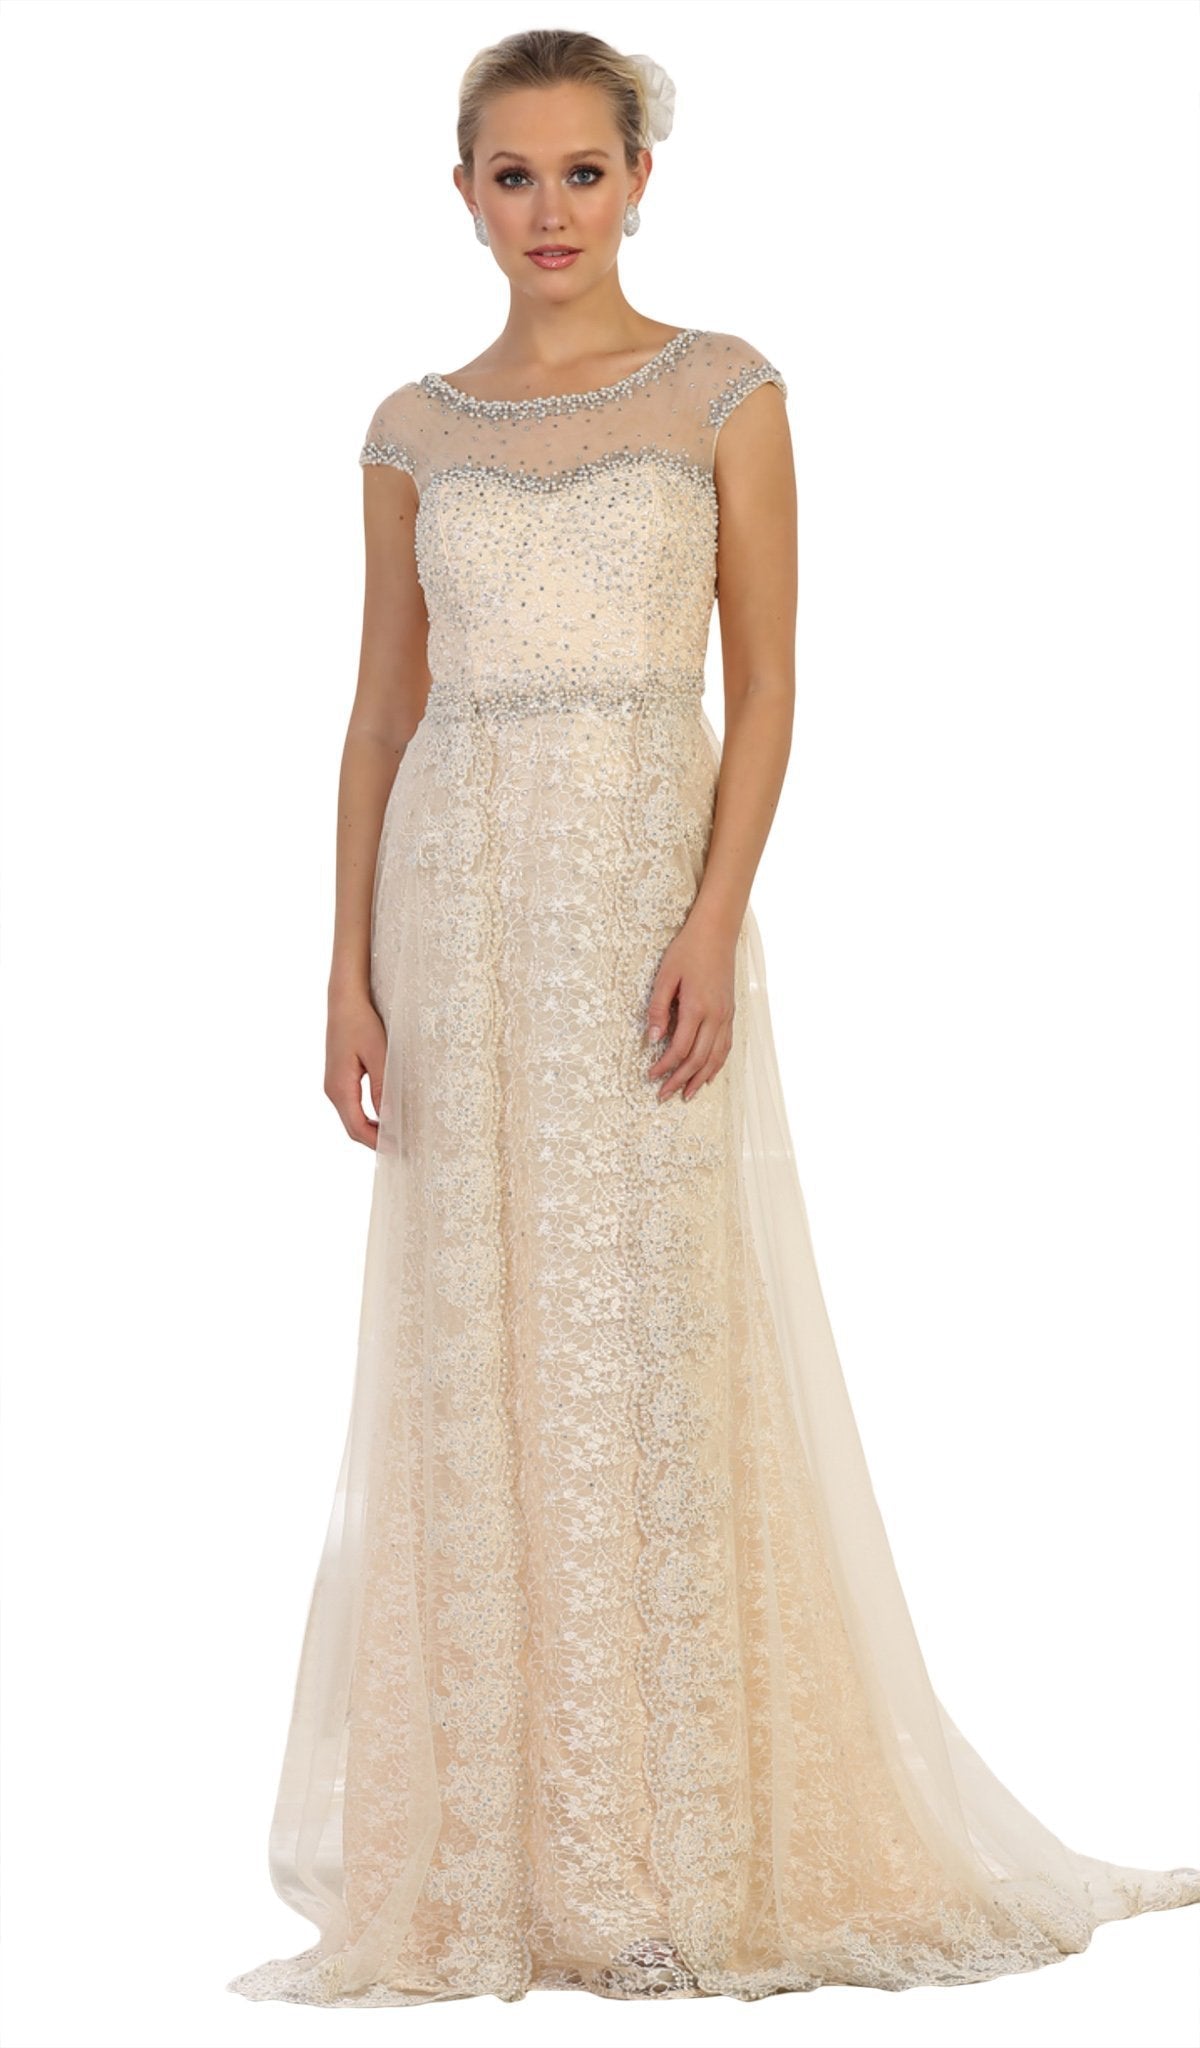 May Queen - RQ7627 Embroidered Bateau A-line Dress Special Occasion Dress 4 / Champagne